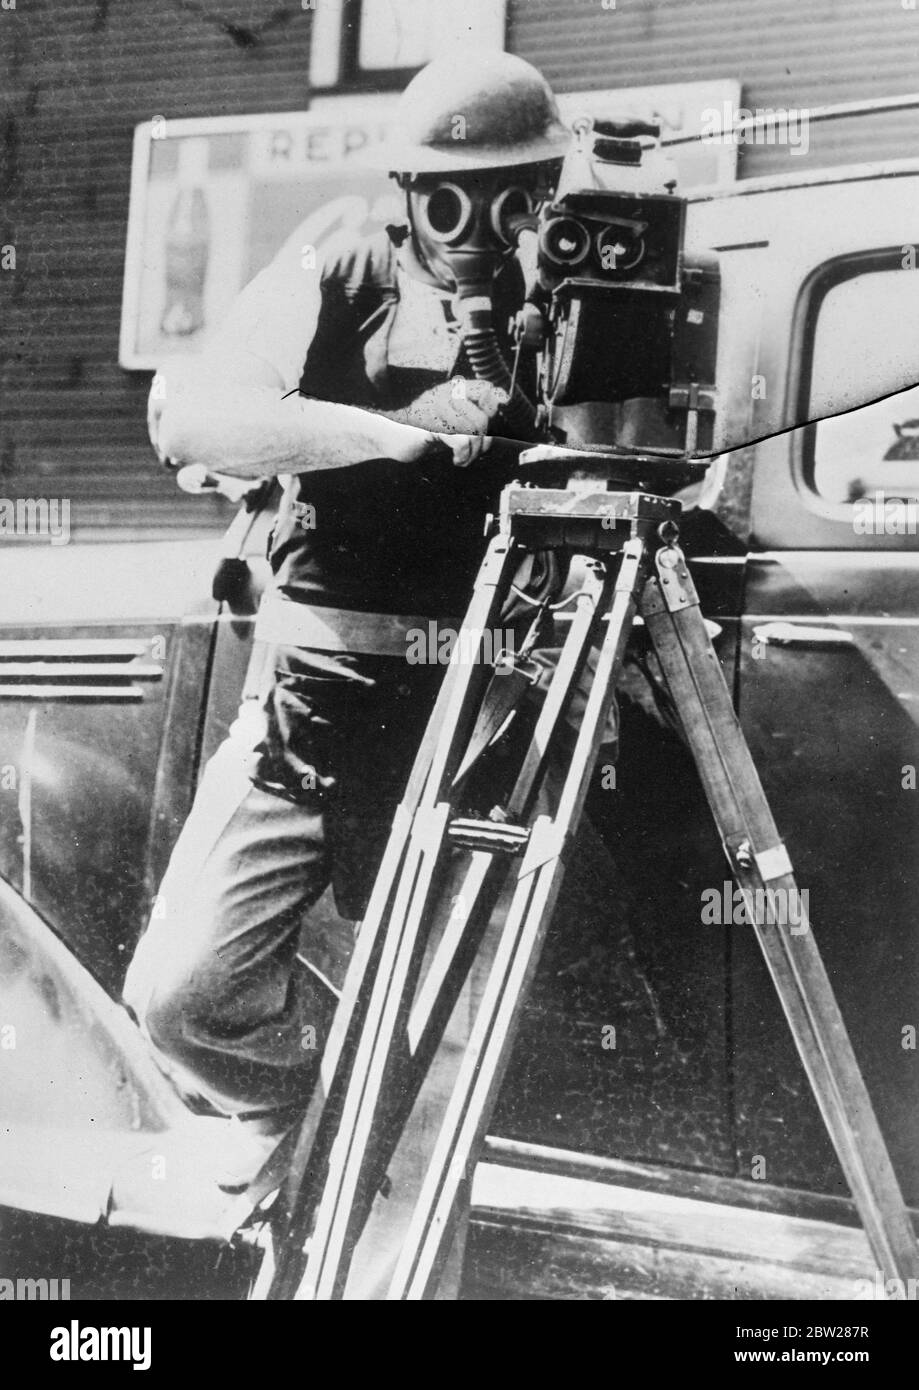 An American news reel cameraman ready for action in a strikers riot ready to go anywhere at any time. Complete with gasmask, steel helmet and a specially reinforced camera. Stock Photo